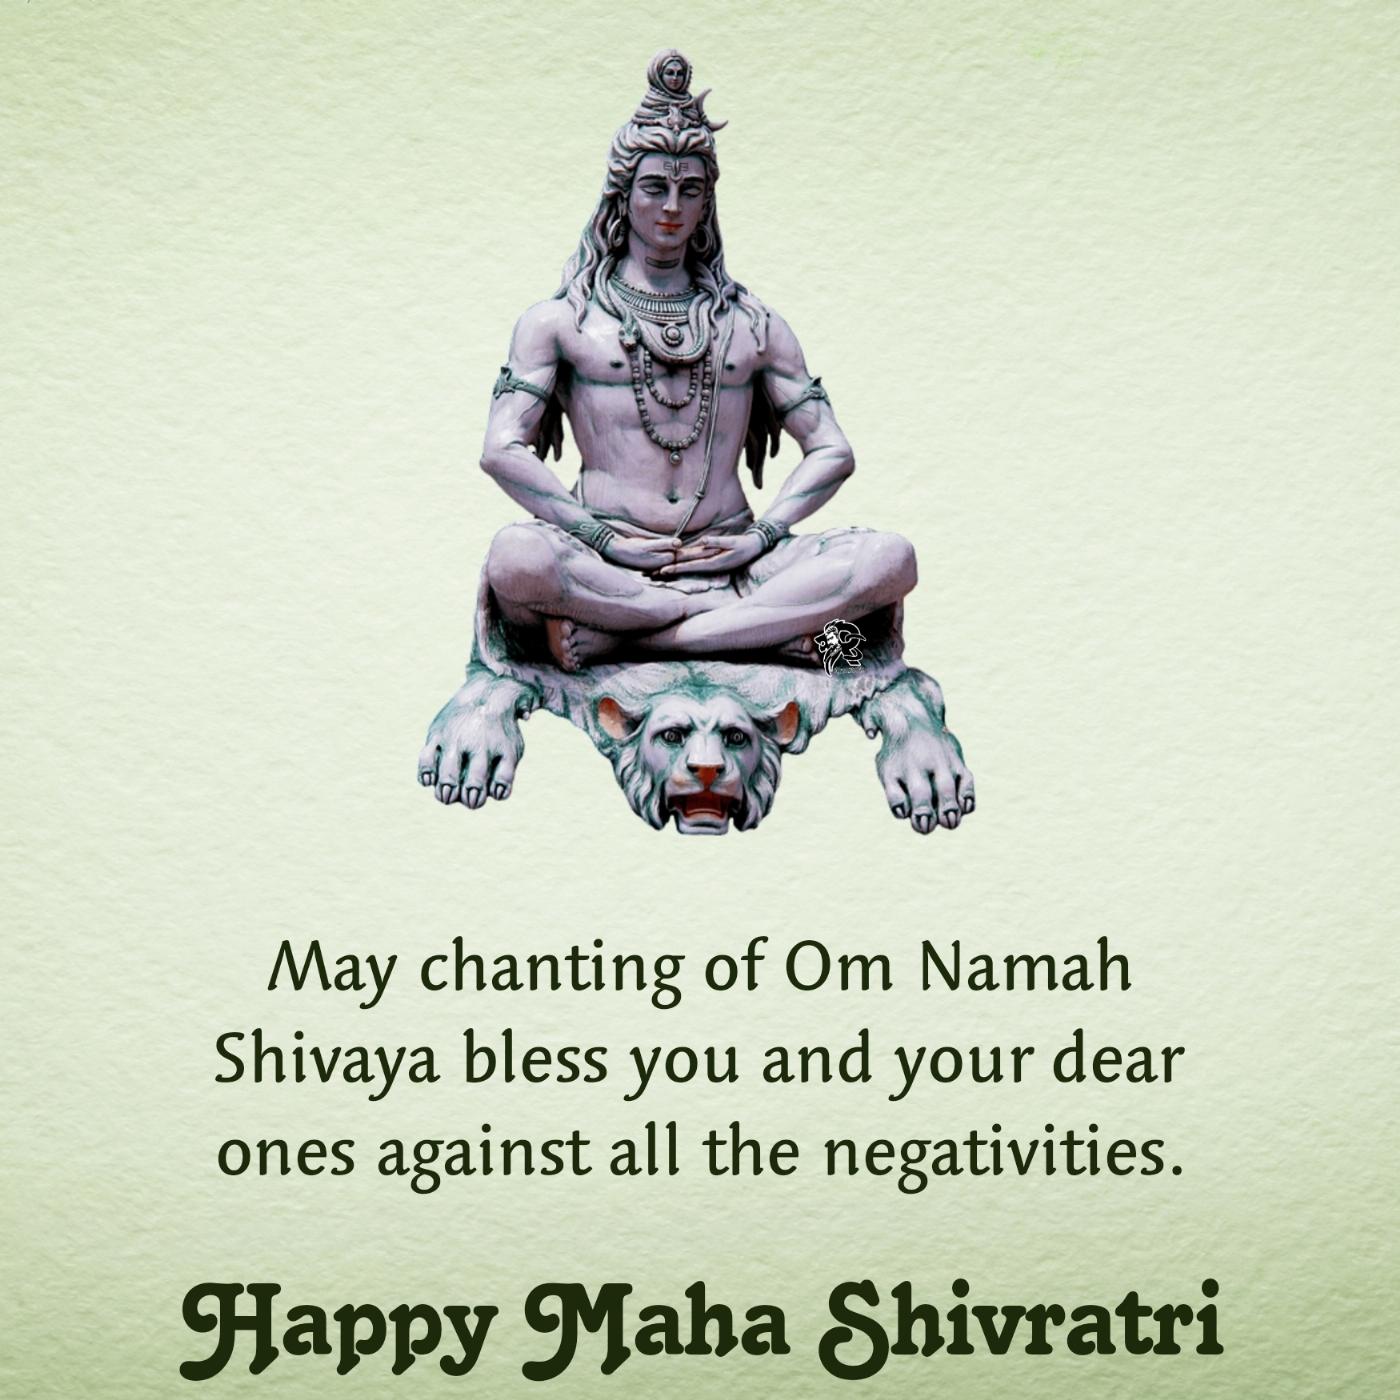 May chanting of Om Namah Shivaya bless you and your dear ones